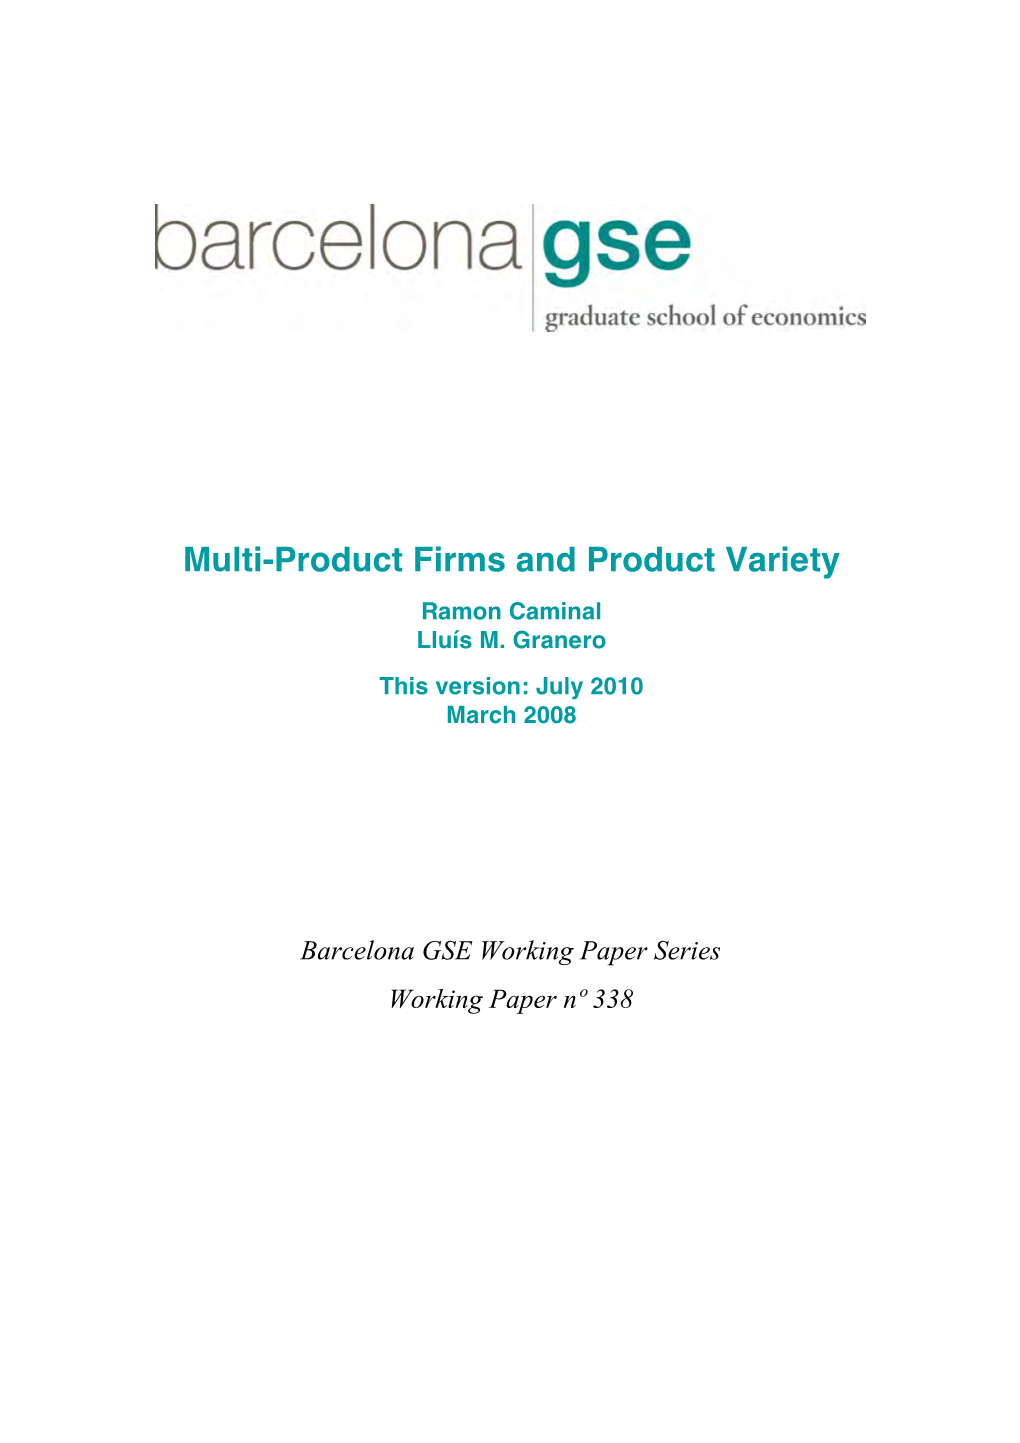 Multi-Product Firms and Product Variety Ramon Caminal Lluís M